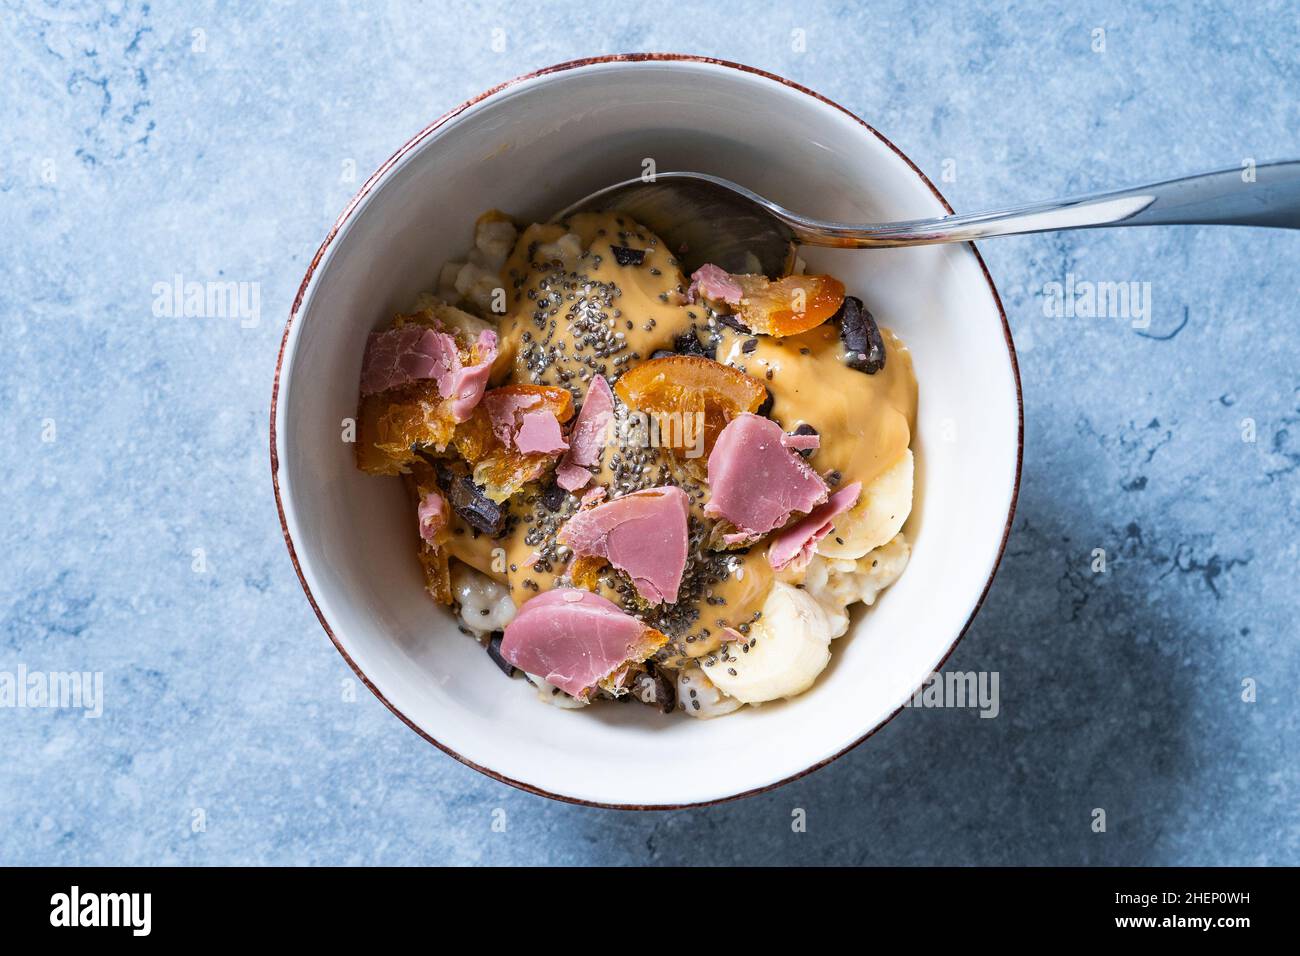 Porridge with Ruby Chocolate, Candied Orange Slices and Chia Seeds. Ready to Eat. Stock Photo